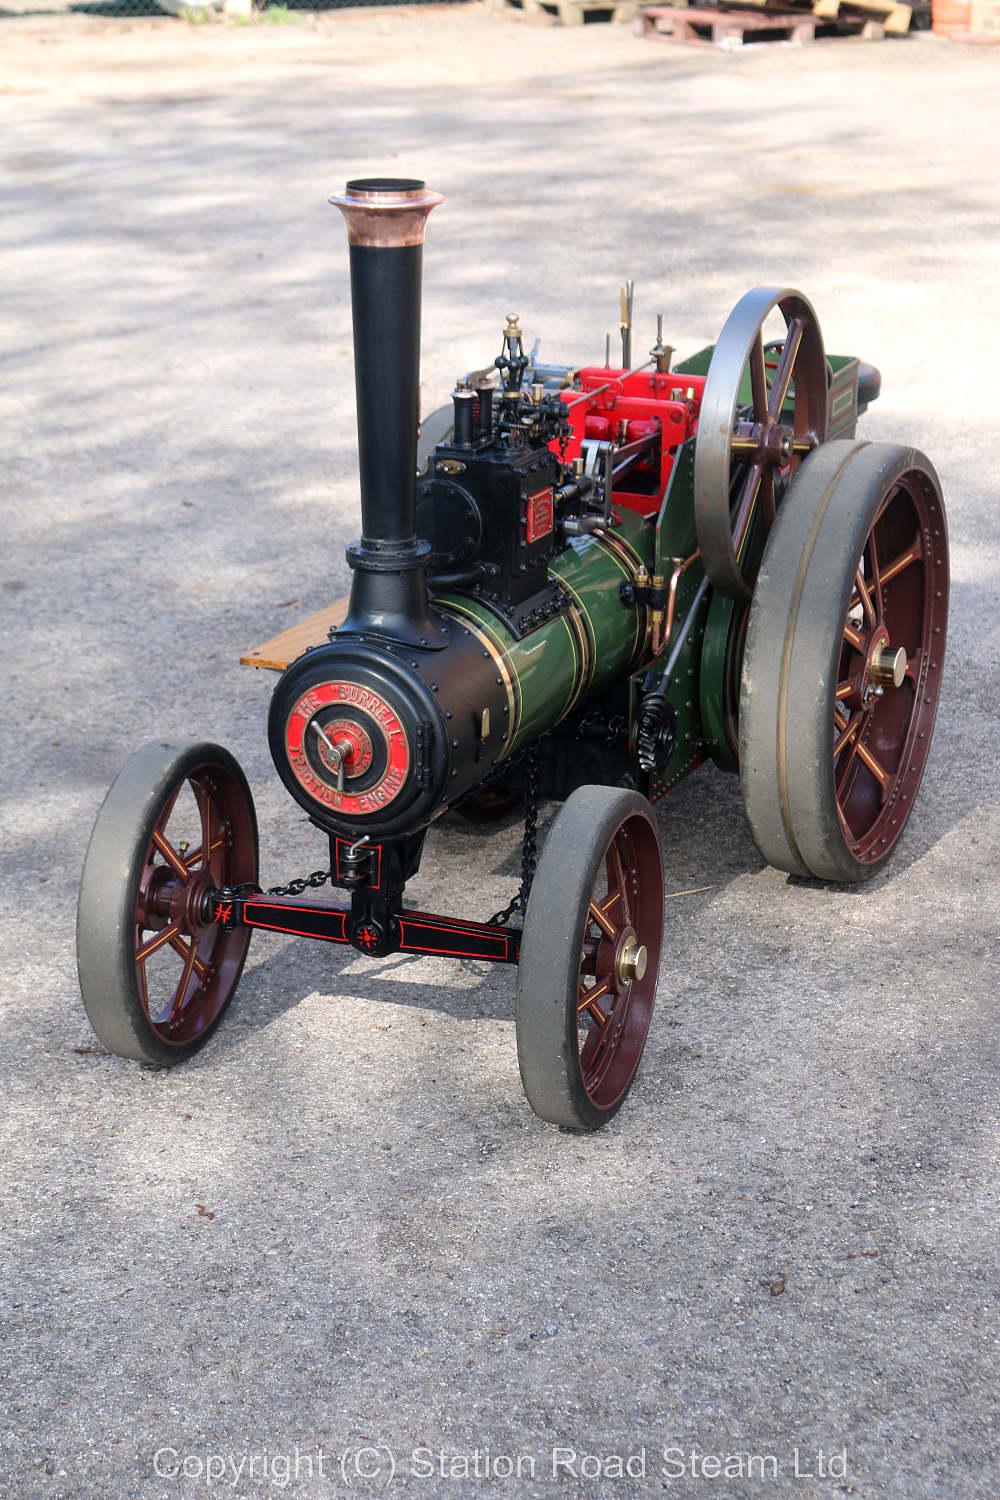 4 inch scale Burrell agricultural engine